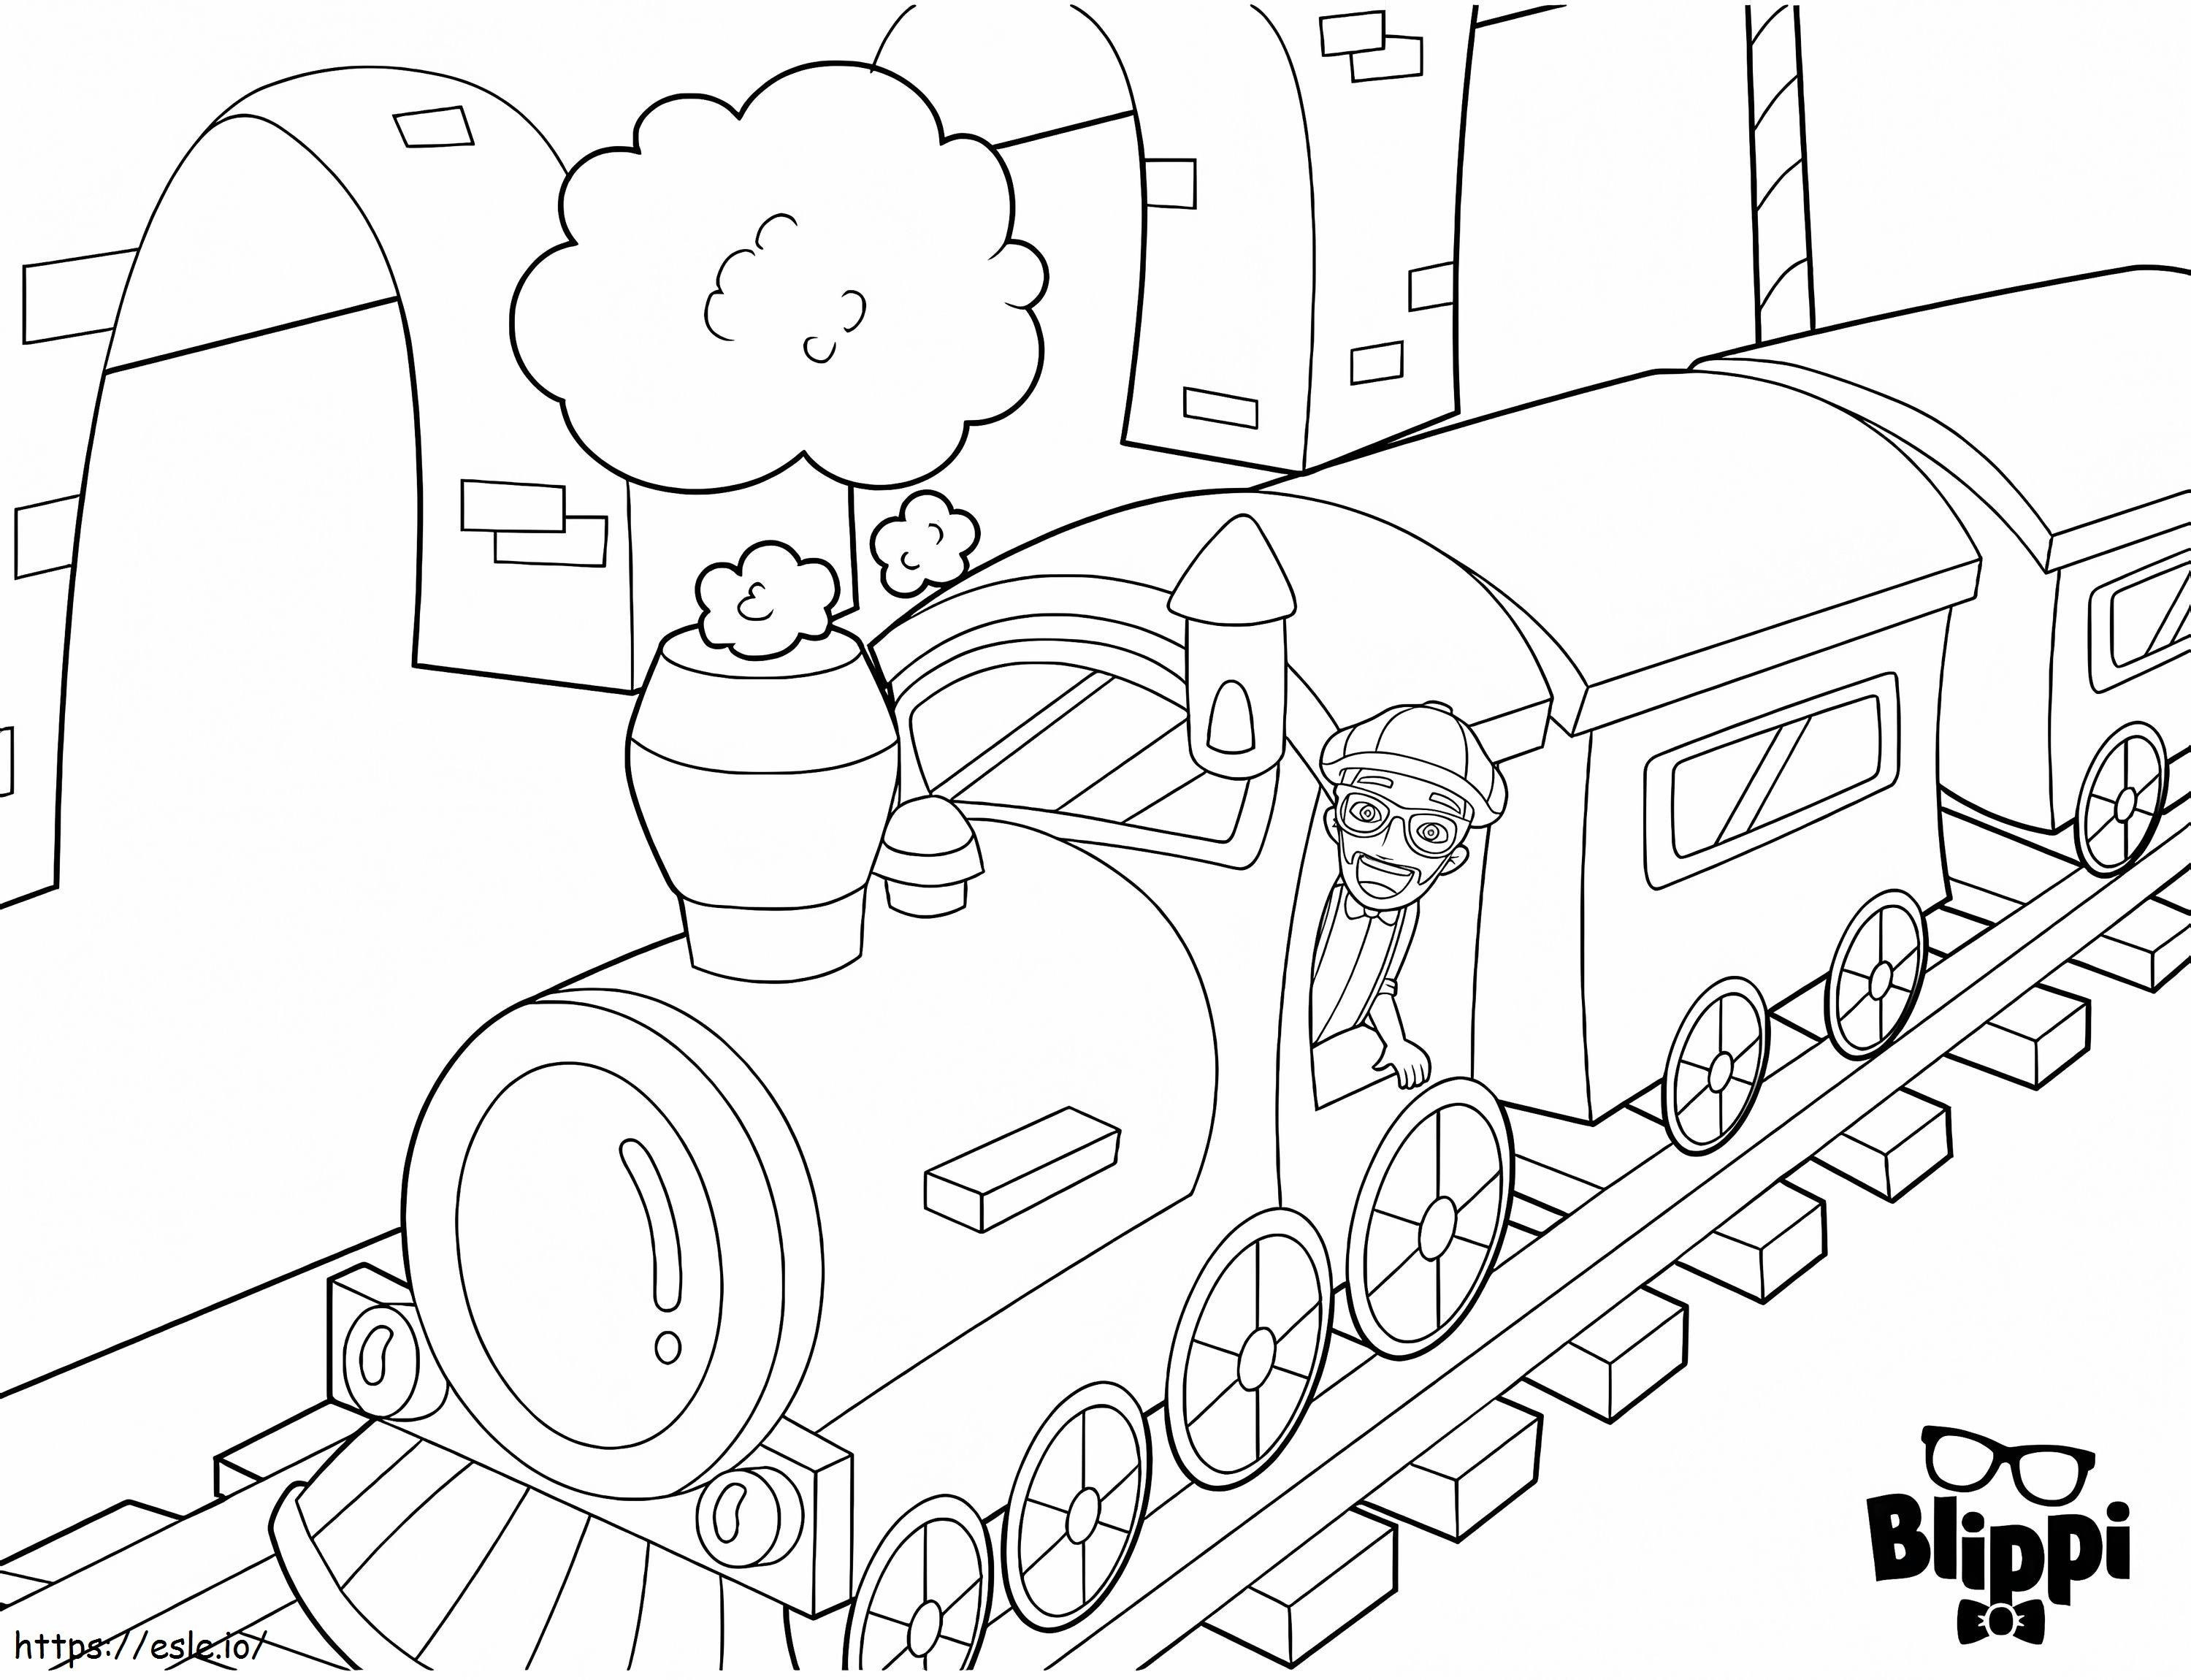 Blippi And Train coloring page